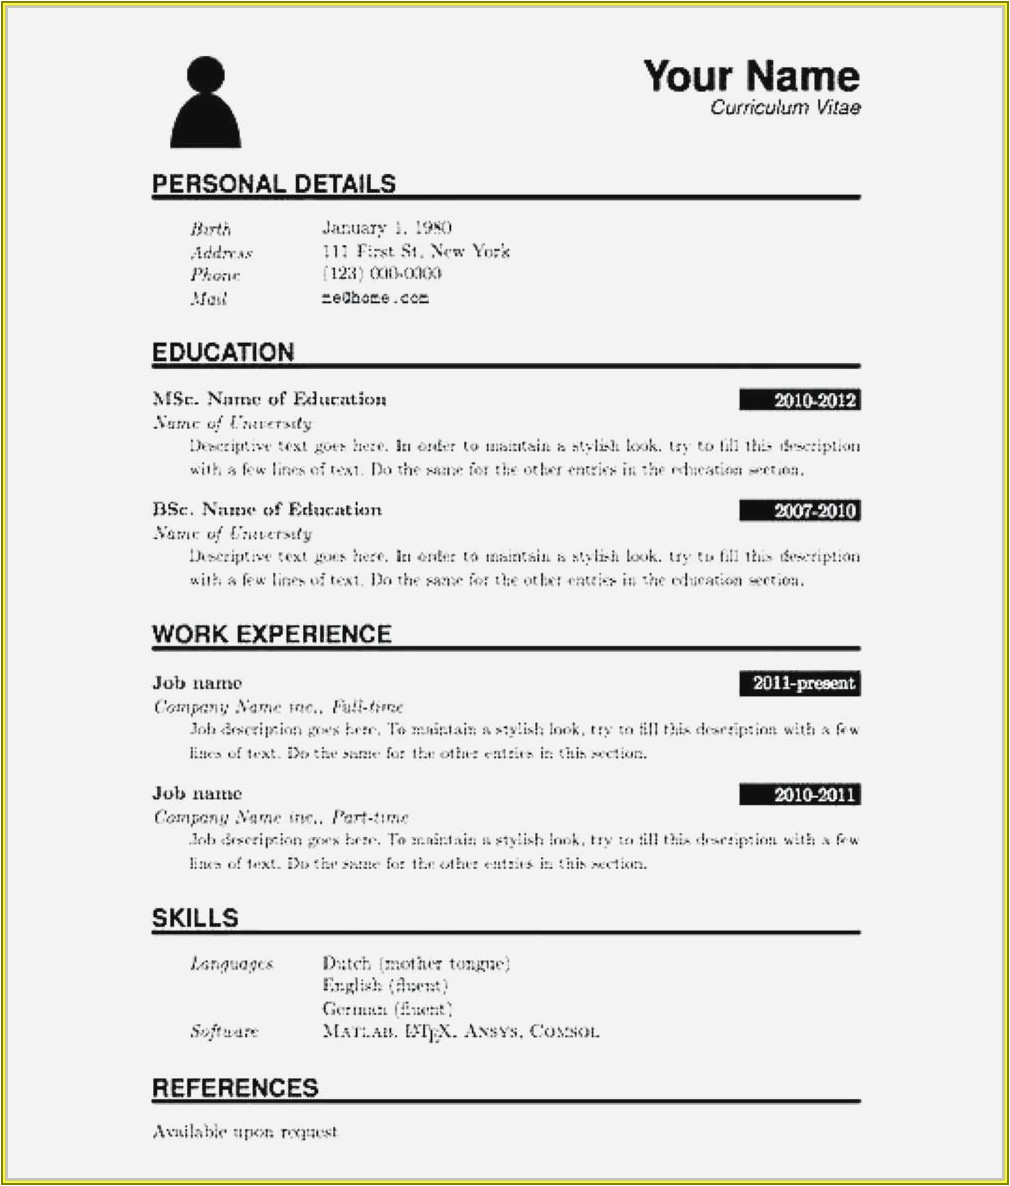 Resume Templates for Freshers Engineers Free Download Resume format for Freshers Download Civil Engineer